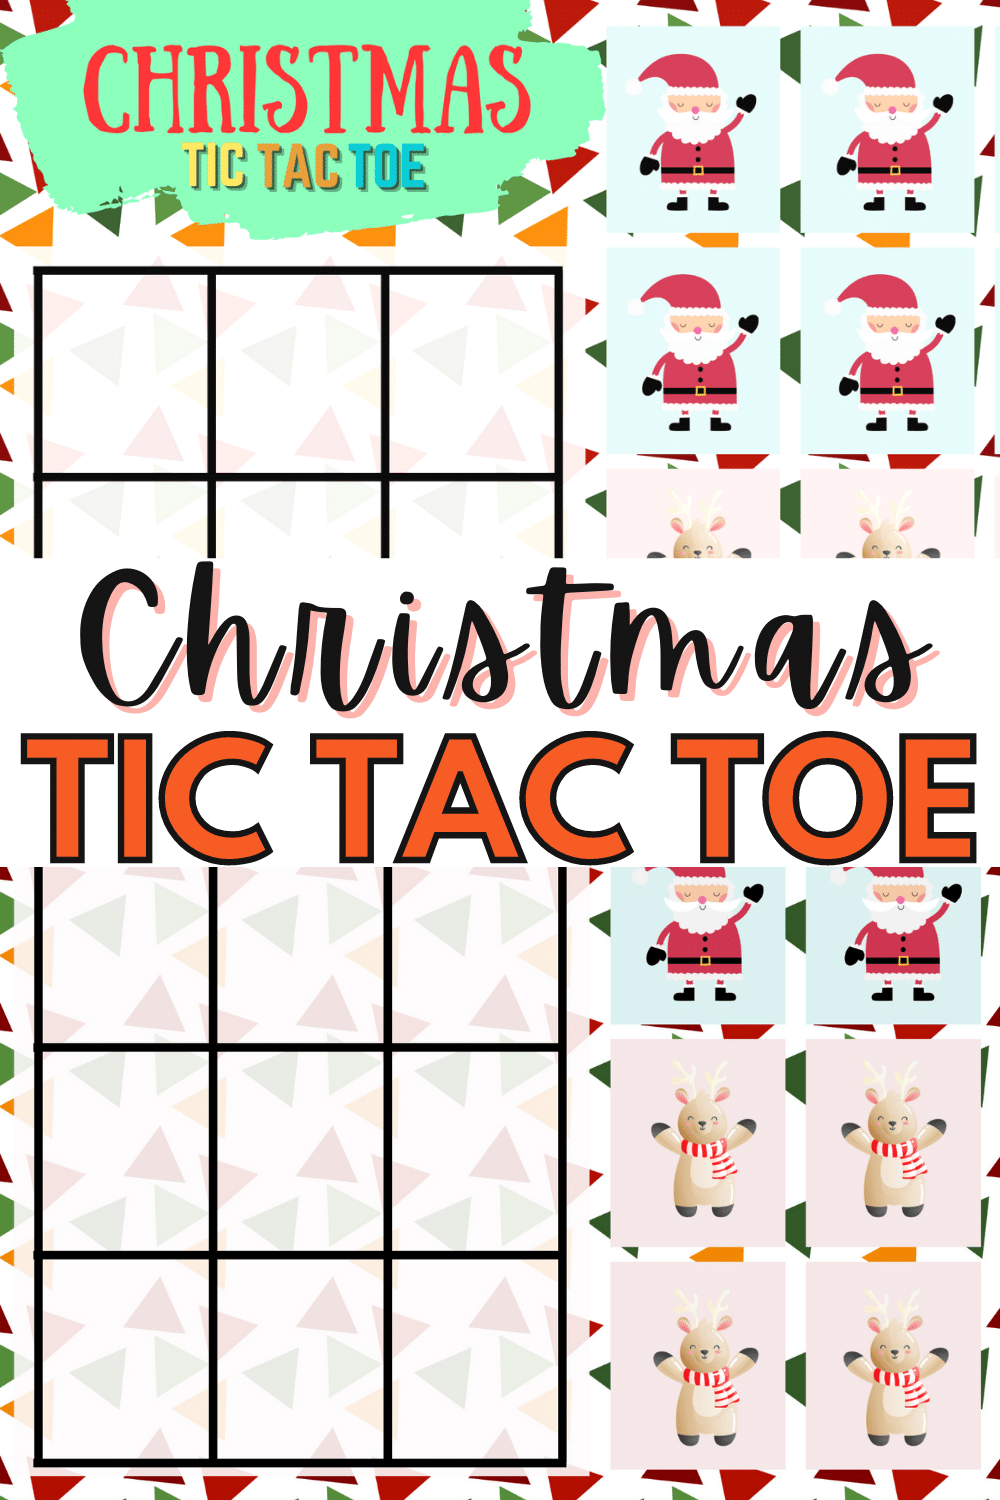 The kids will have a blast challenging you with this Christmas Tic Tac Toe game! Who will be the winner? You'll have to play to find out! #christmas #tictactoe #game #forkids #freeprintable via @wondermomwannab